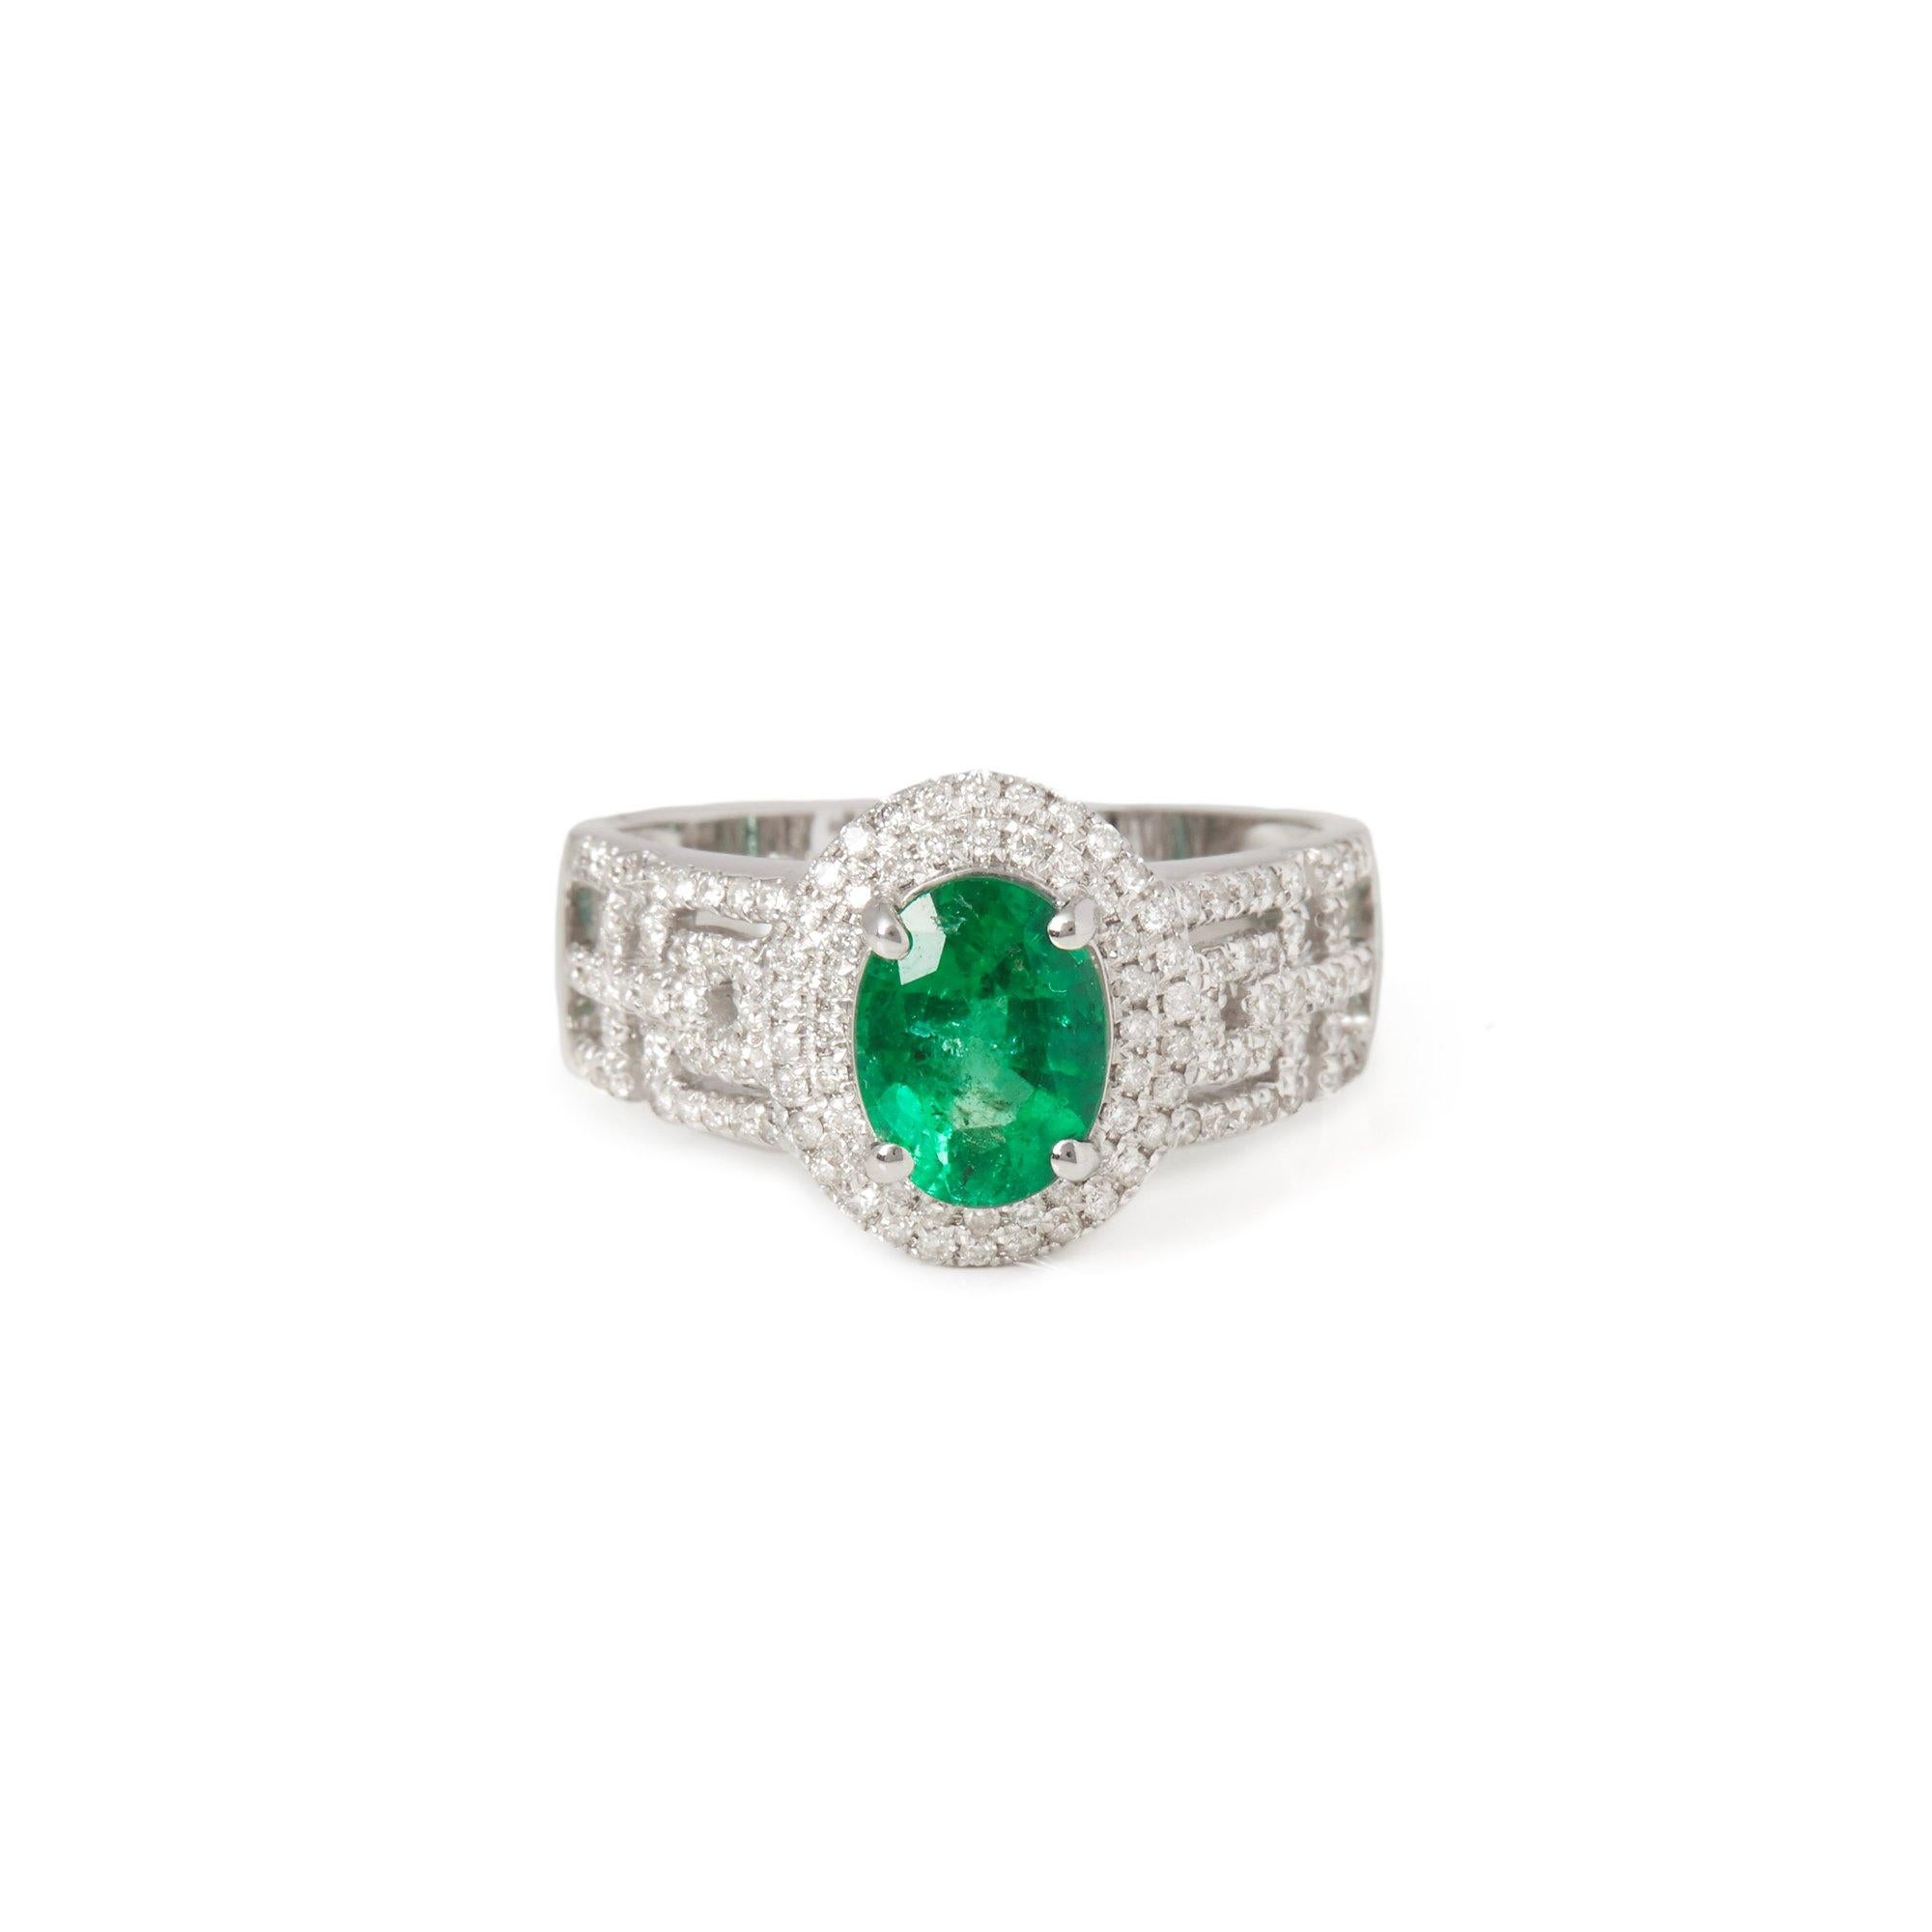 This ring designed by David Jerome is from his private collection and features one oval cut Emerald totalling 1.23cts sourced in Zambia. Set with round brilliant cut Diamonds totalling 0.48cts mounted in an 18k white gold setting. Finger size UK L,